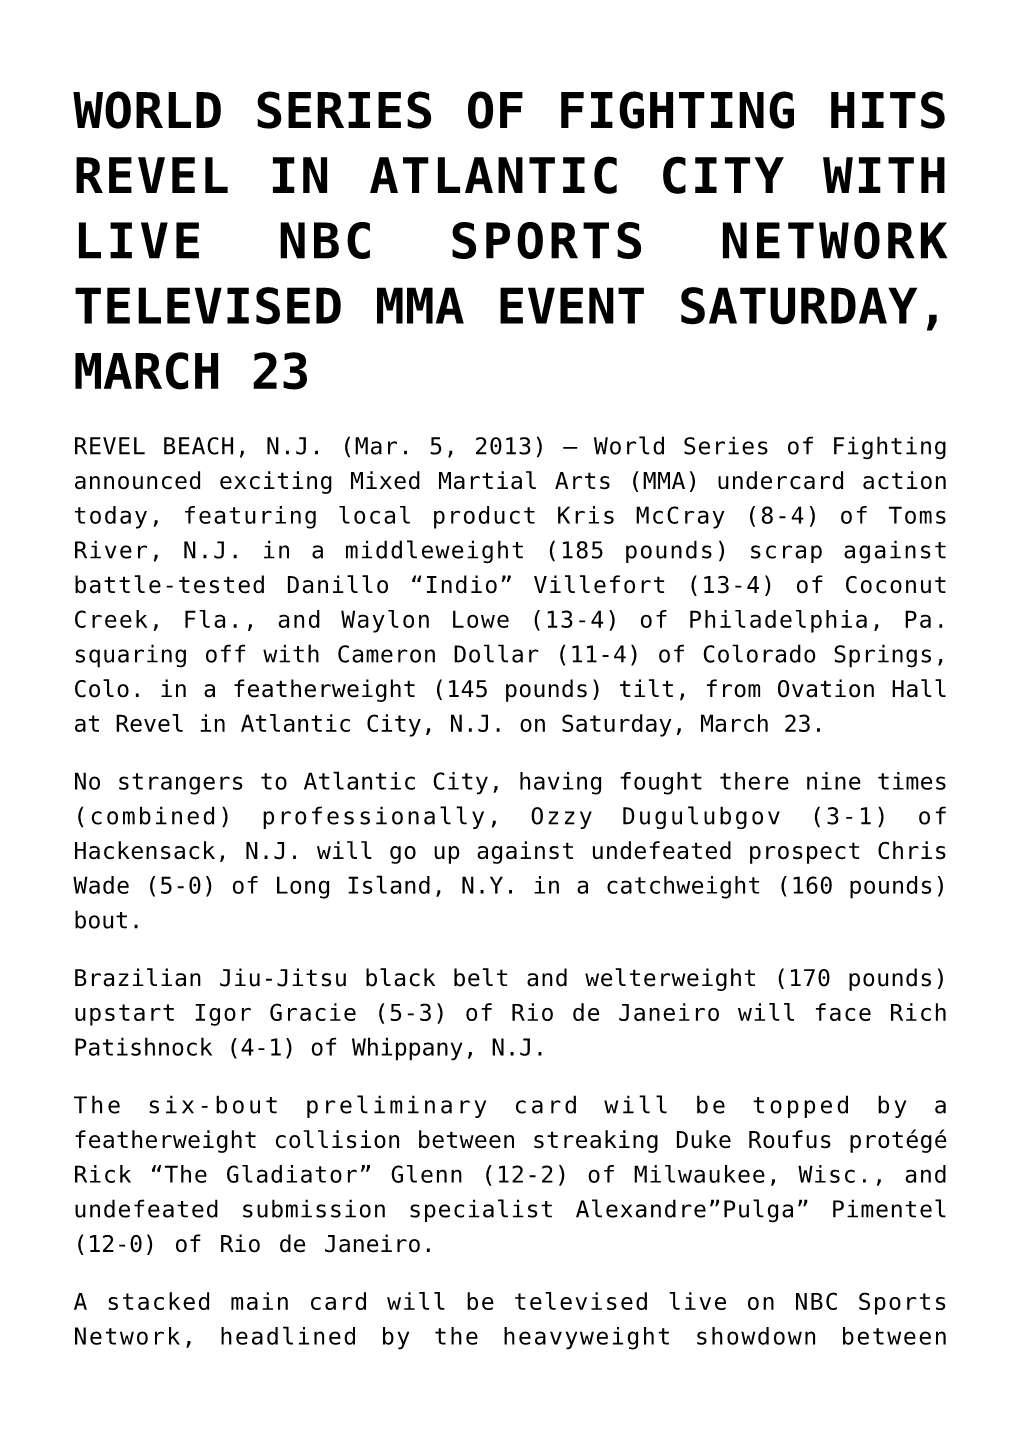 World Series of Fighting Hits Revel in Atlantic City with Live Nbc Sports Network Televised Mma Event Saturday, March 23